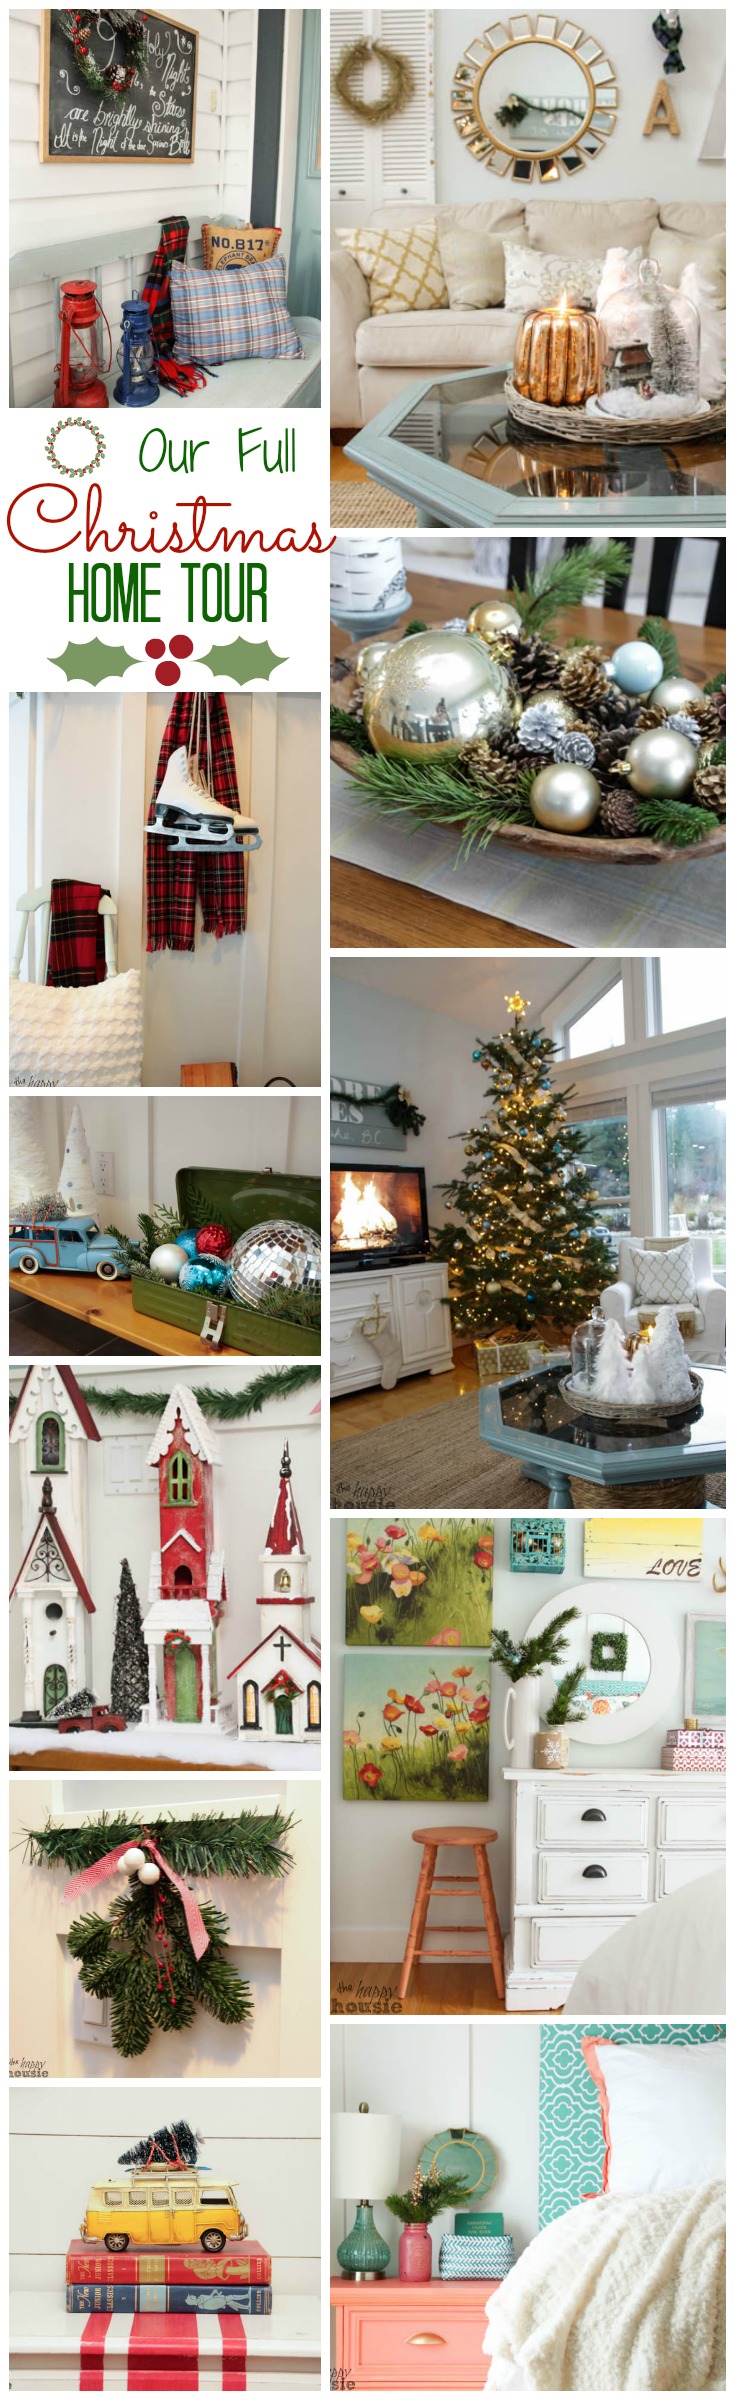 Deck the Halls our Full Christmas Home Tour come on by for a tour of all our holiday decor at The Happy Housie poster.